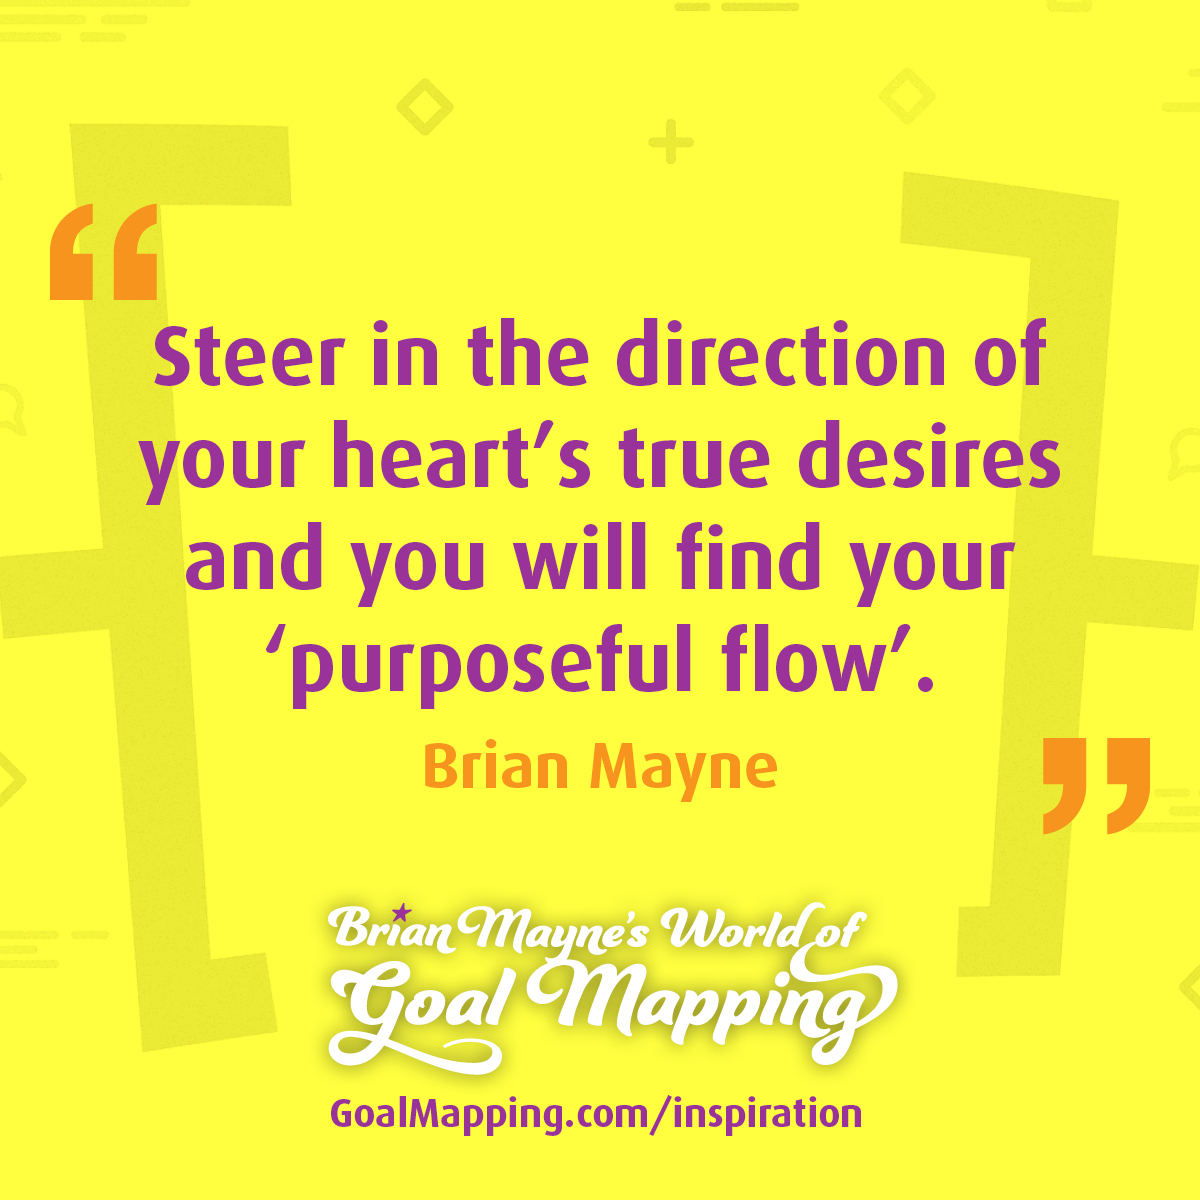 "Steer in the direction of your hearts true desires and you will find your ‘purposeful flow’." Brian Mayne